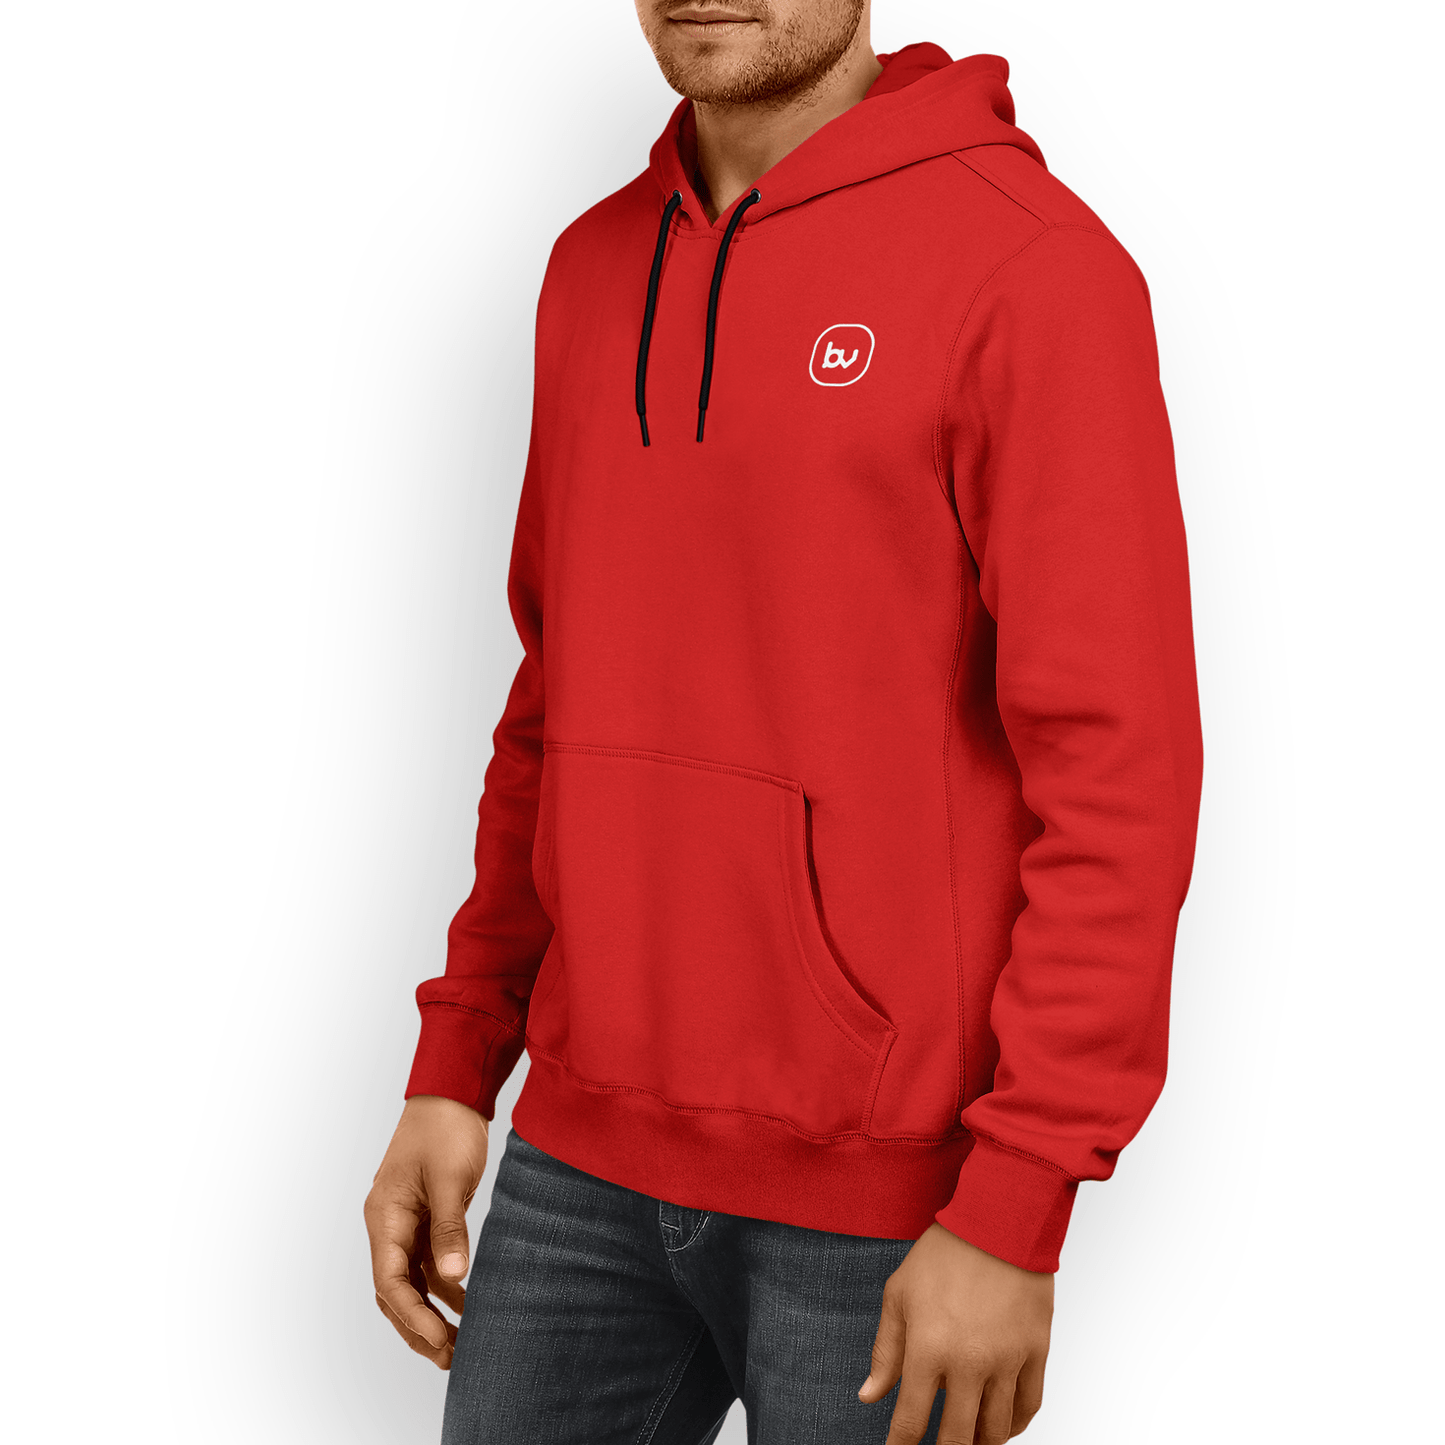 Bazarville Void HD S / Red Hoodie - Red